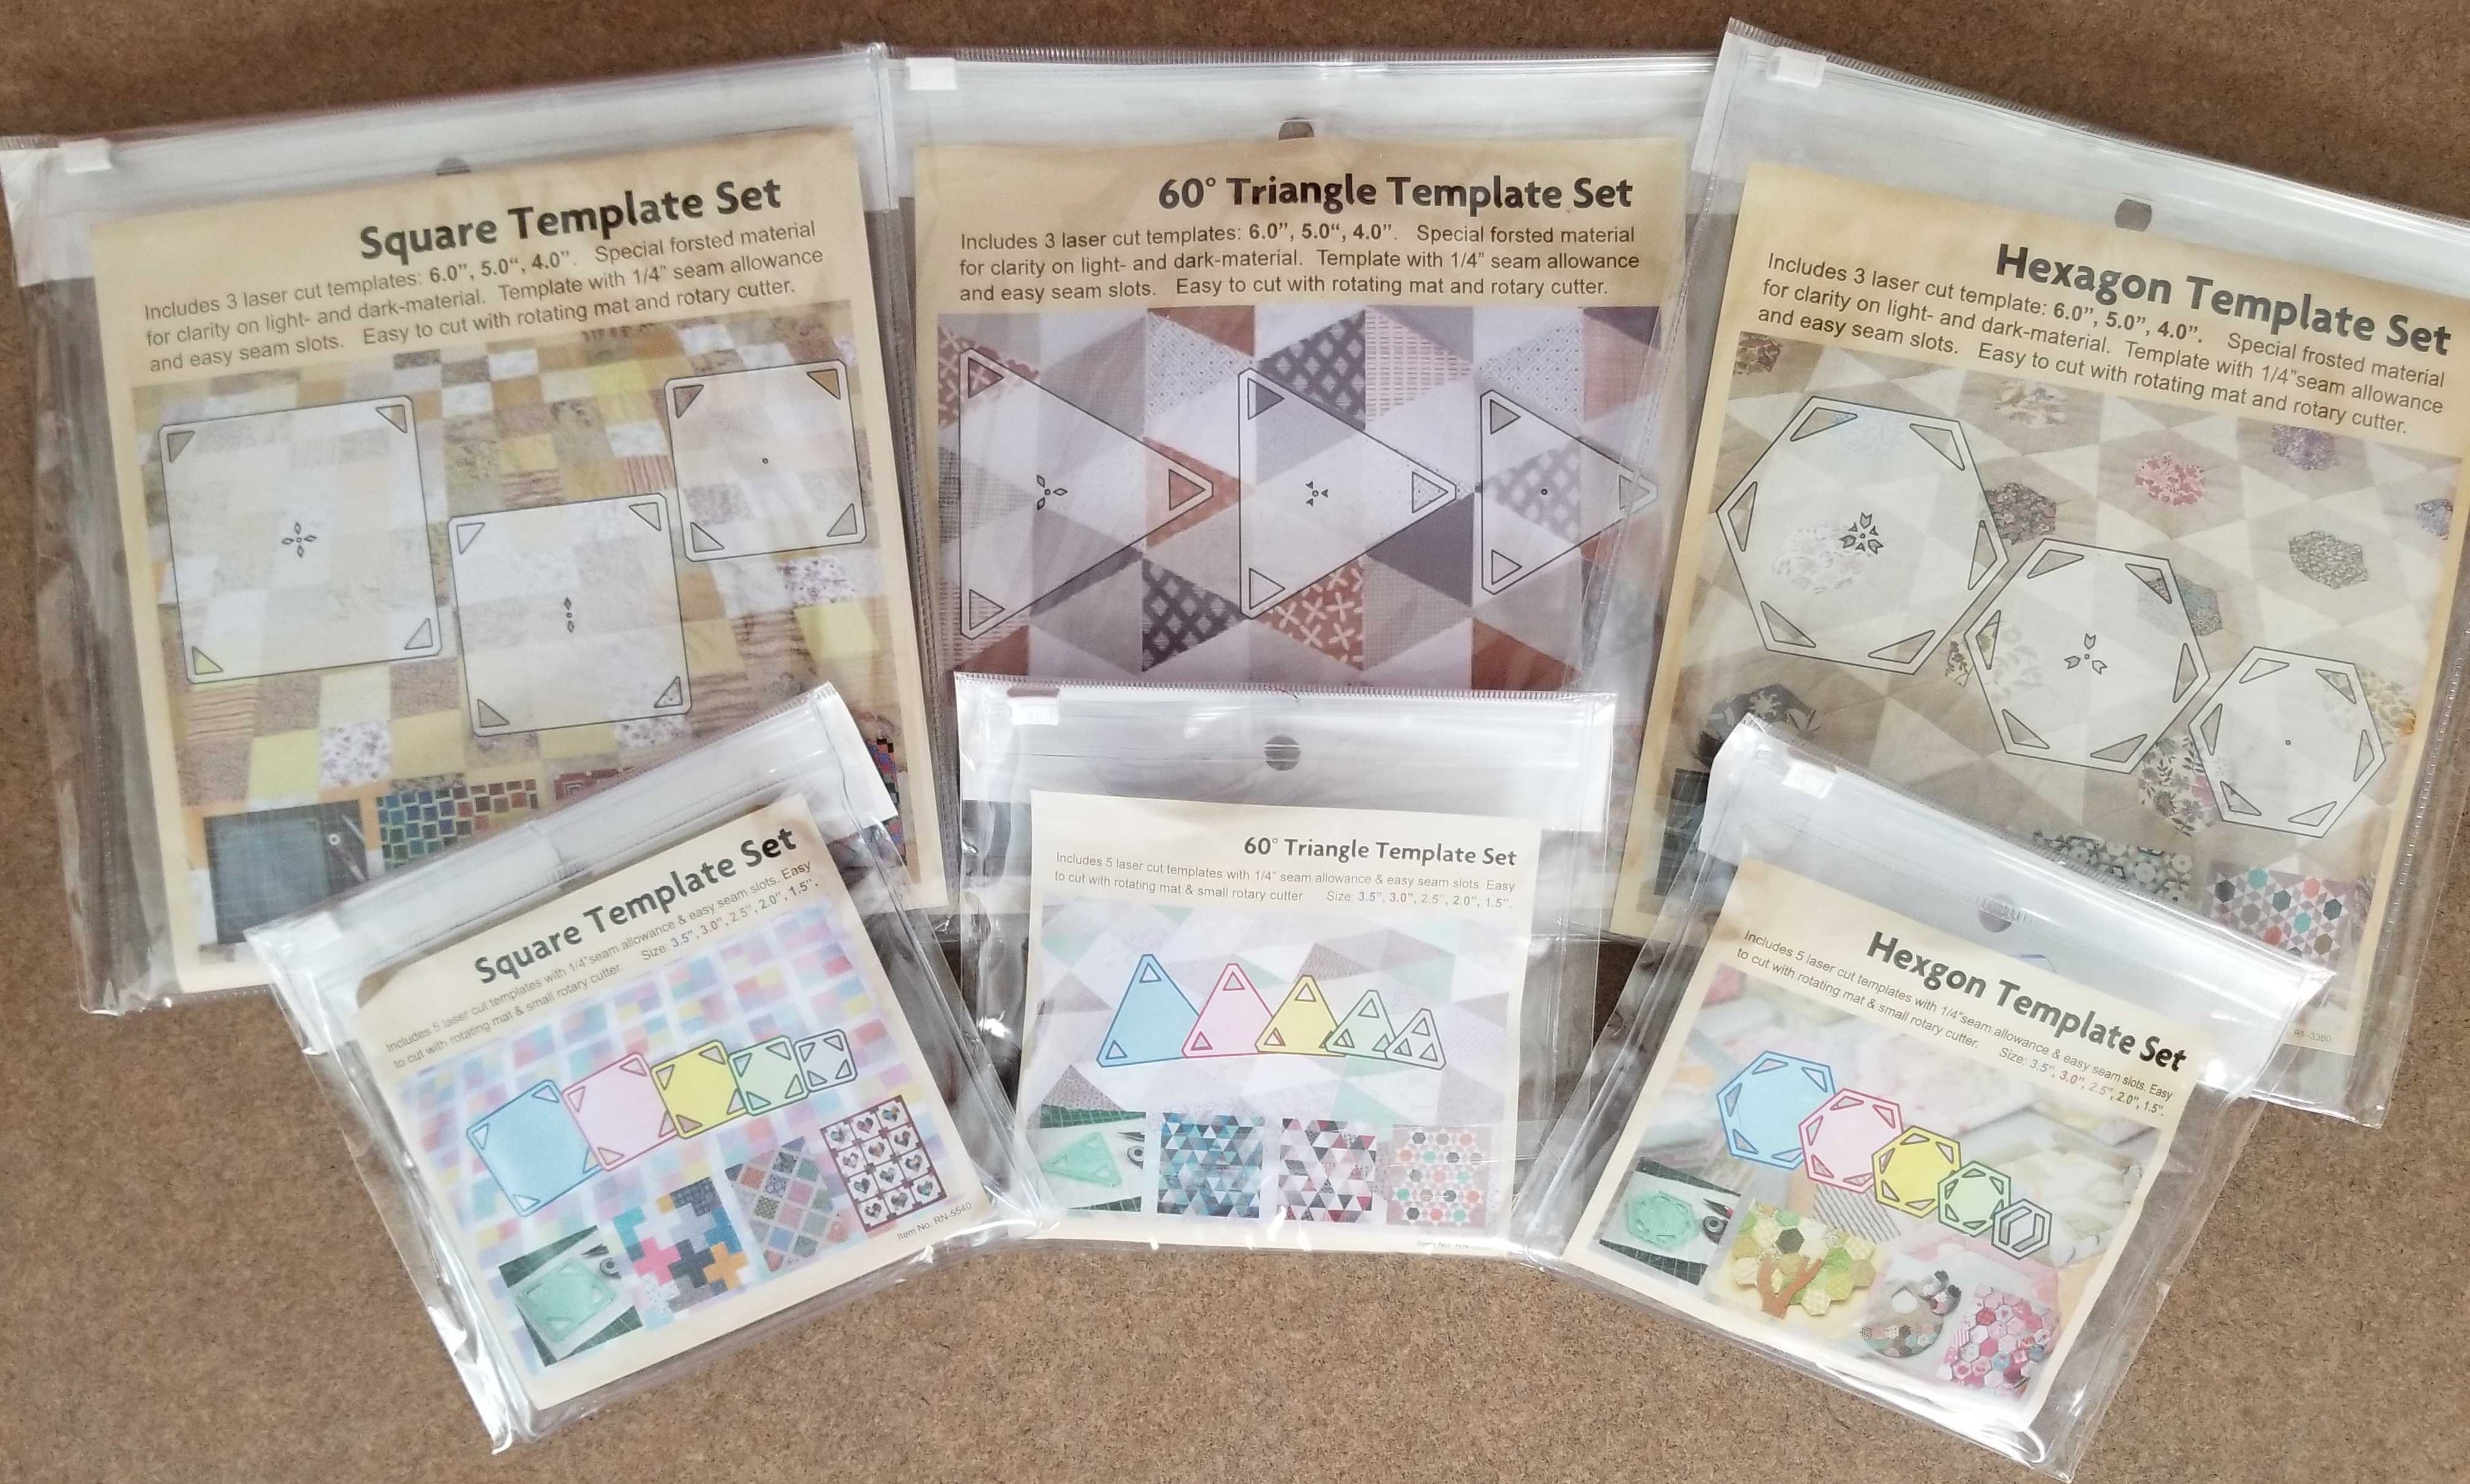 Square, 60 Degree Triangle and Hexagon Quilting Template Sets in Big and Small Sizes.